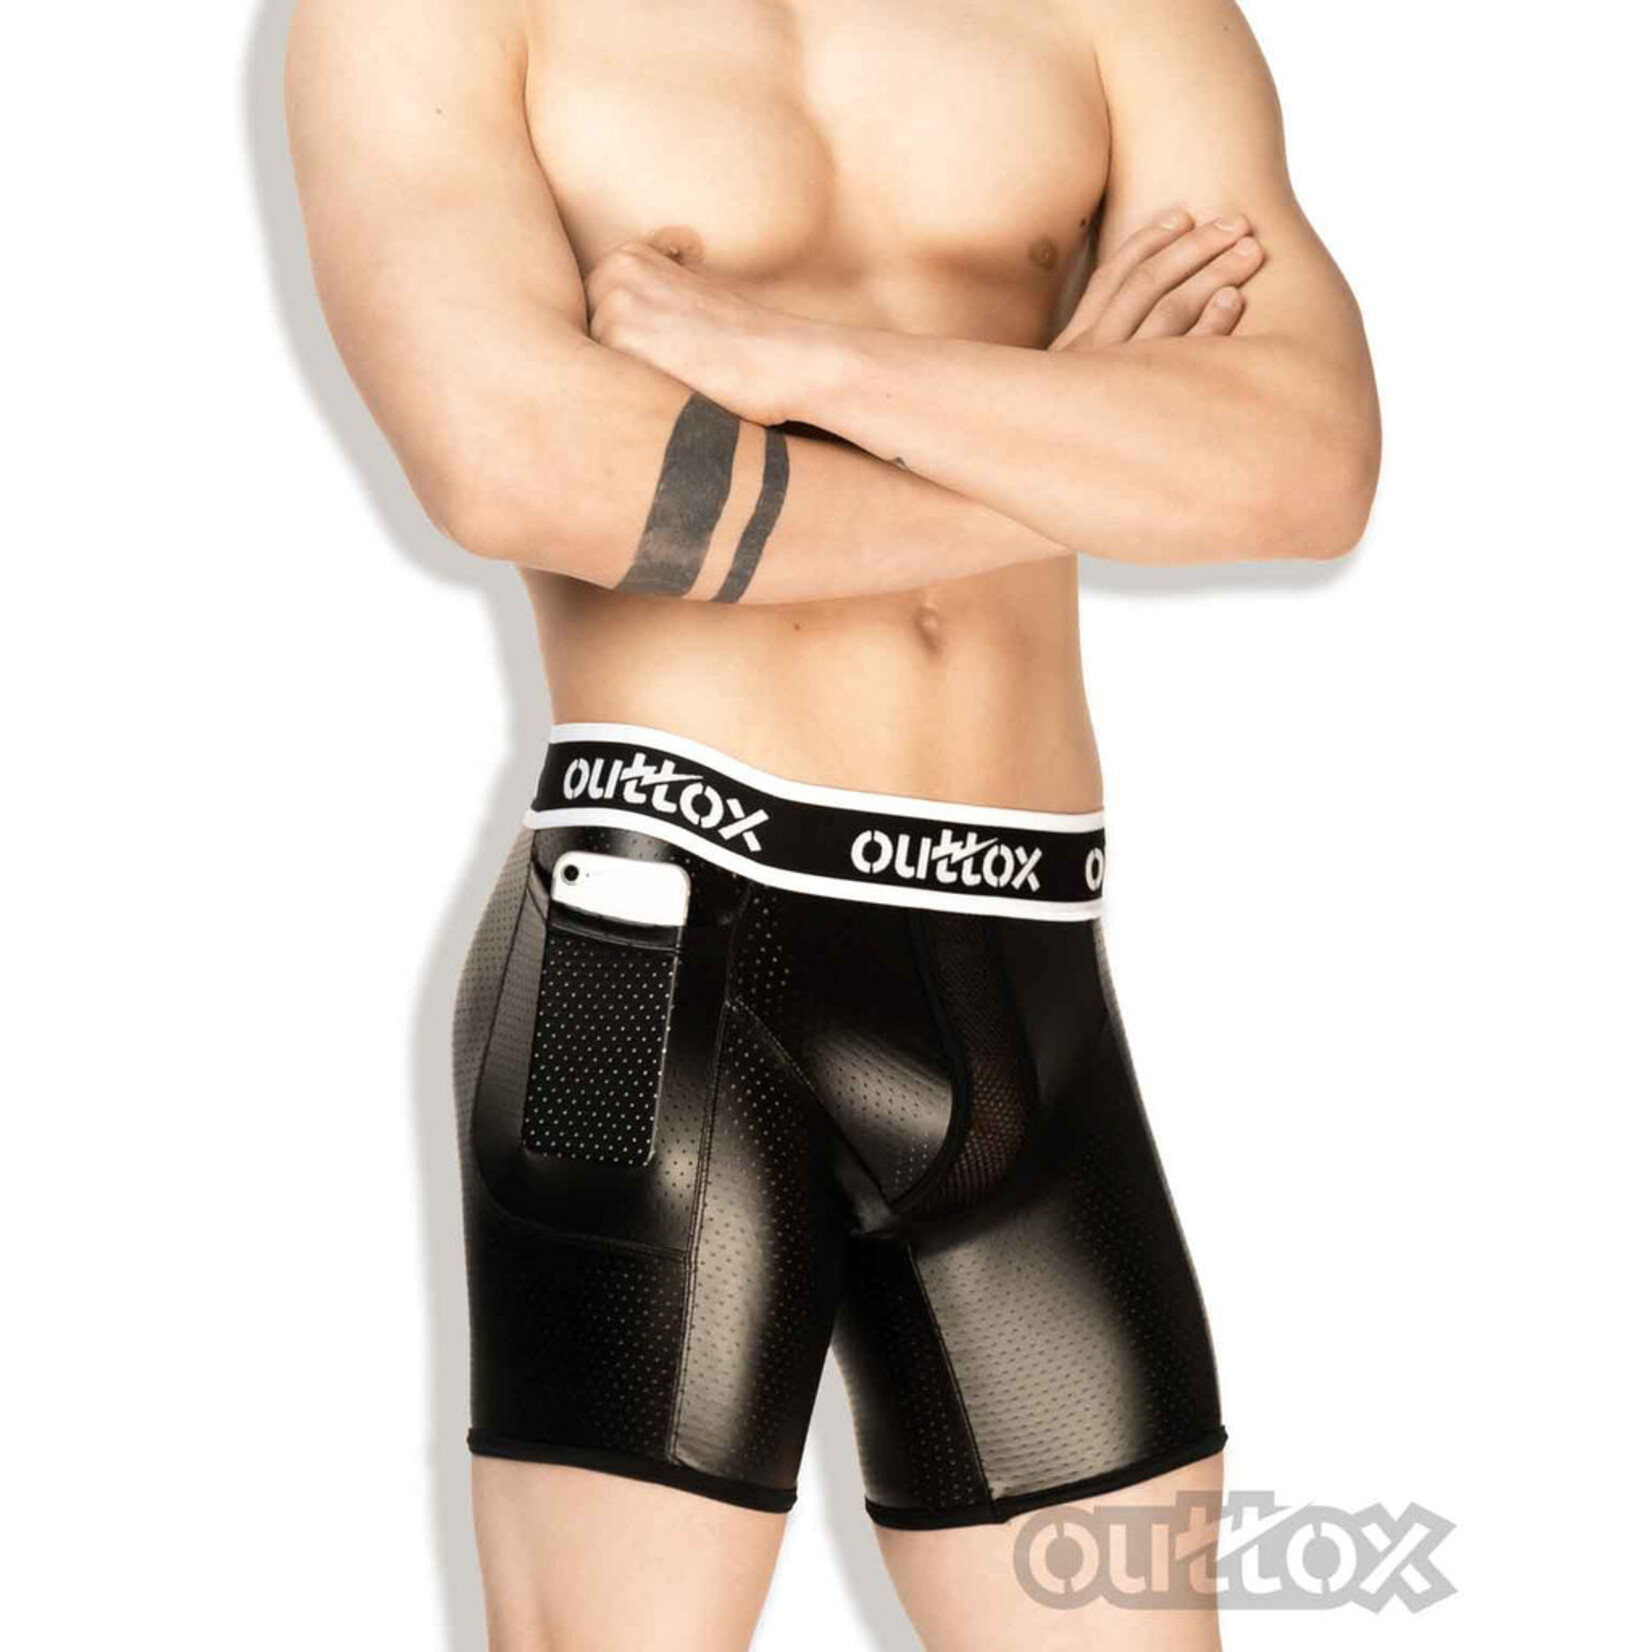 Maskulo/Outtox Outtox Zippered Rear Cycling Shorts